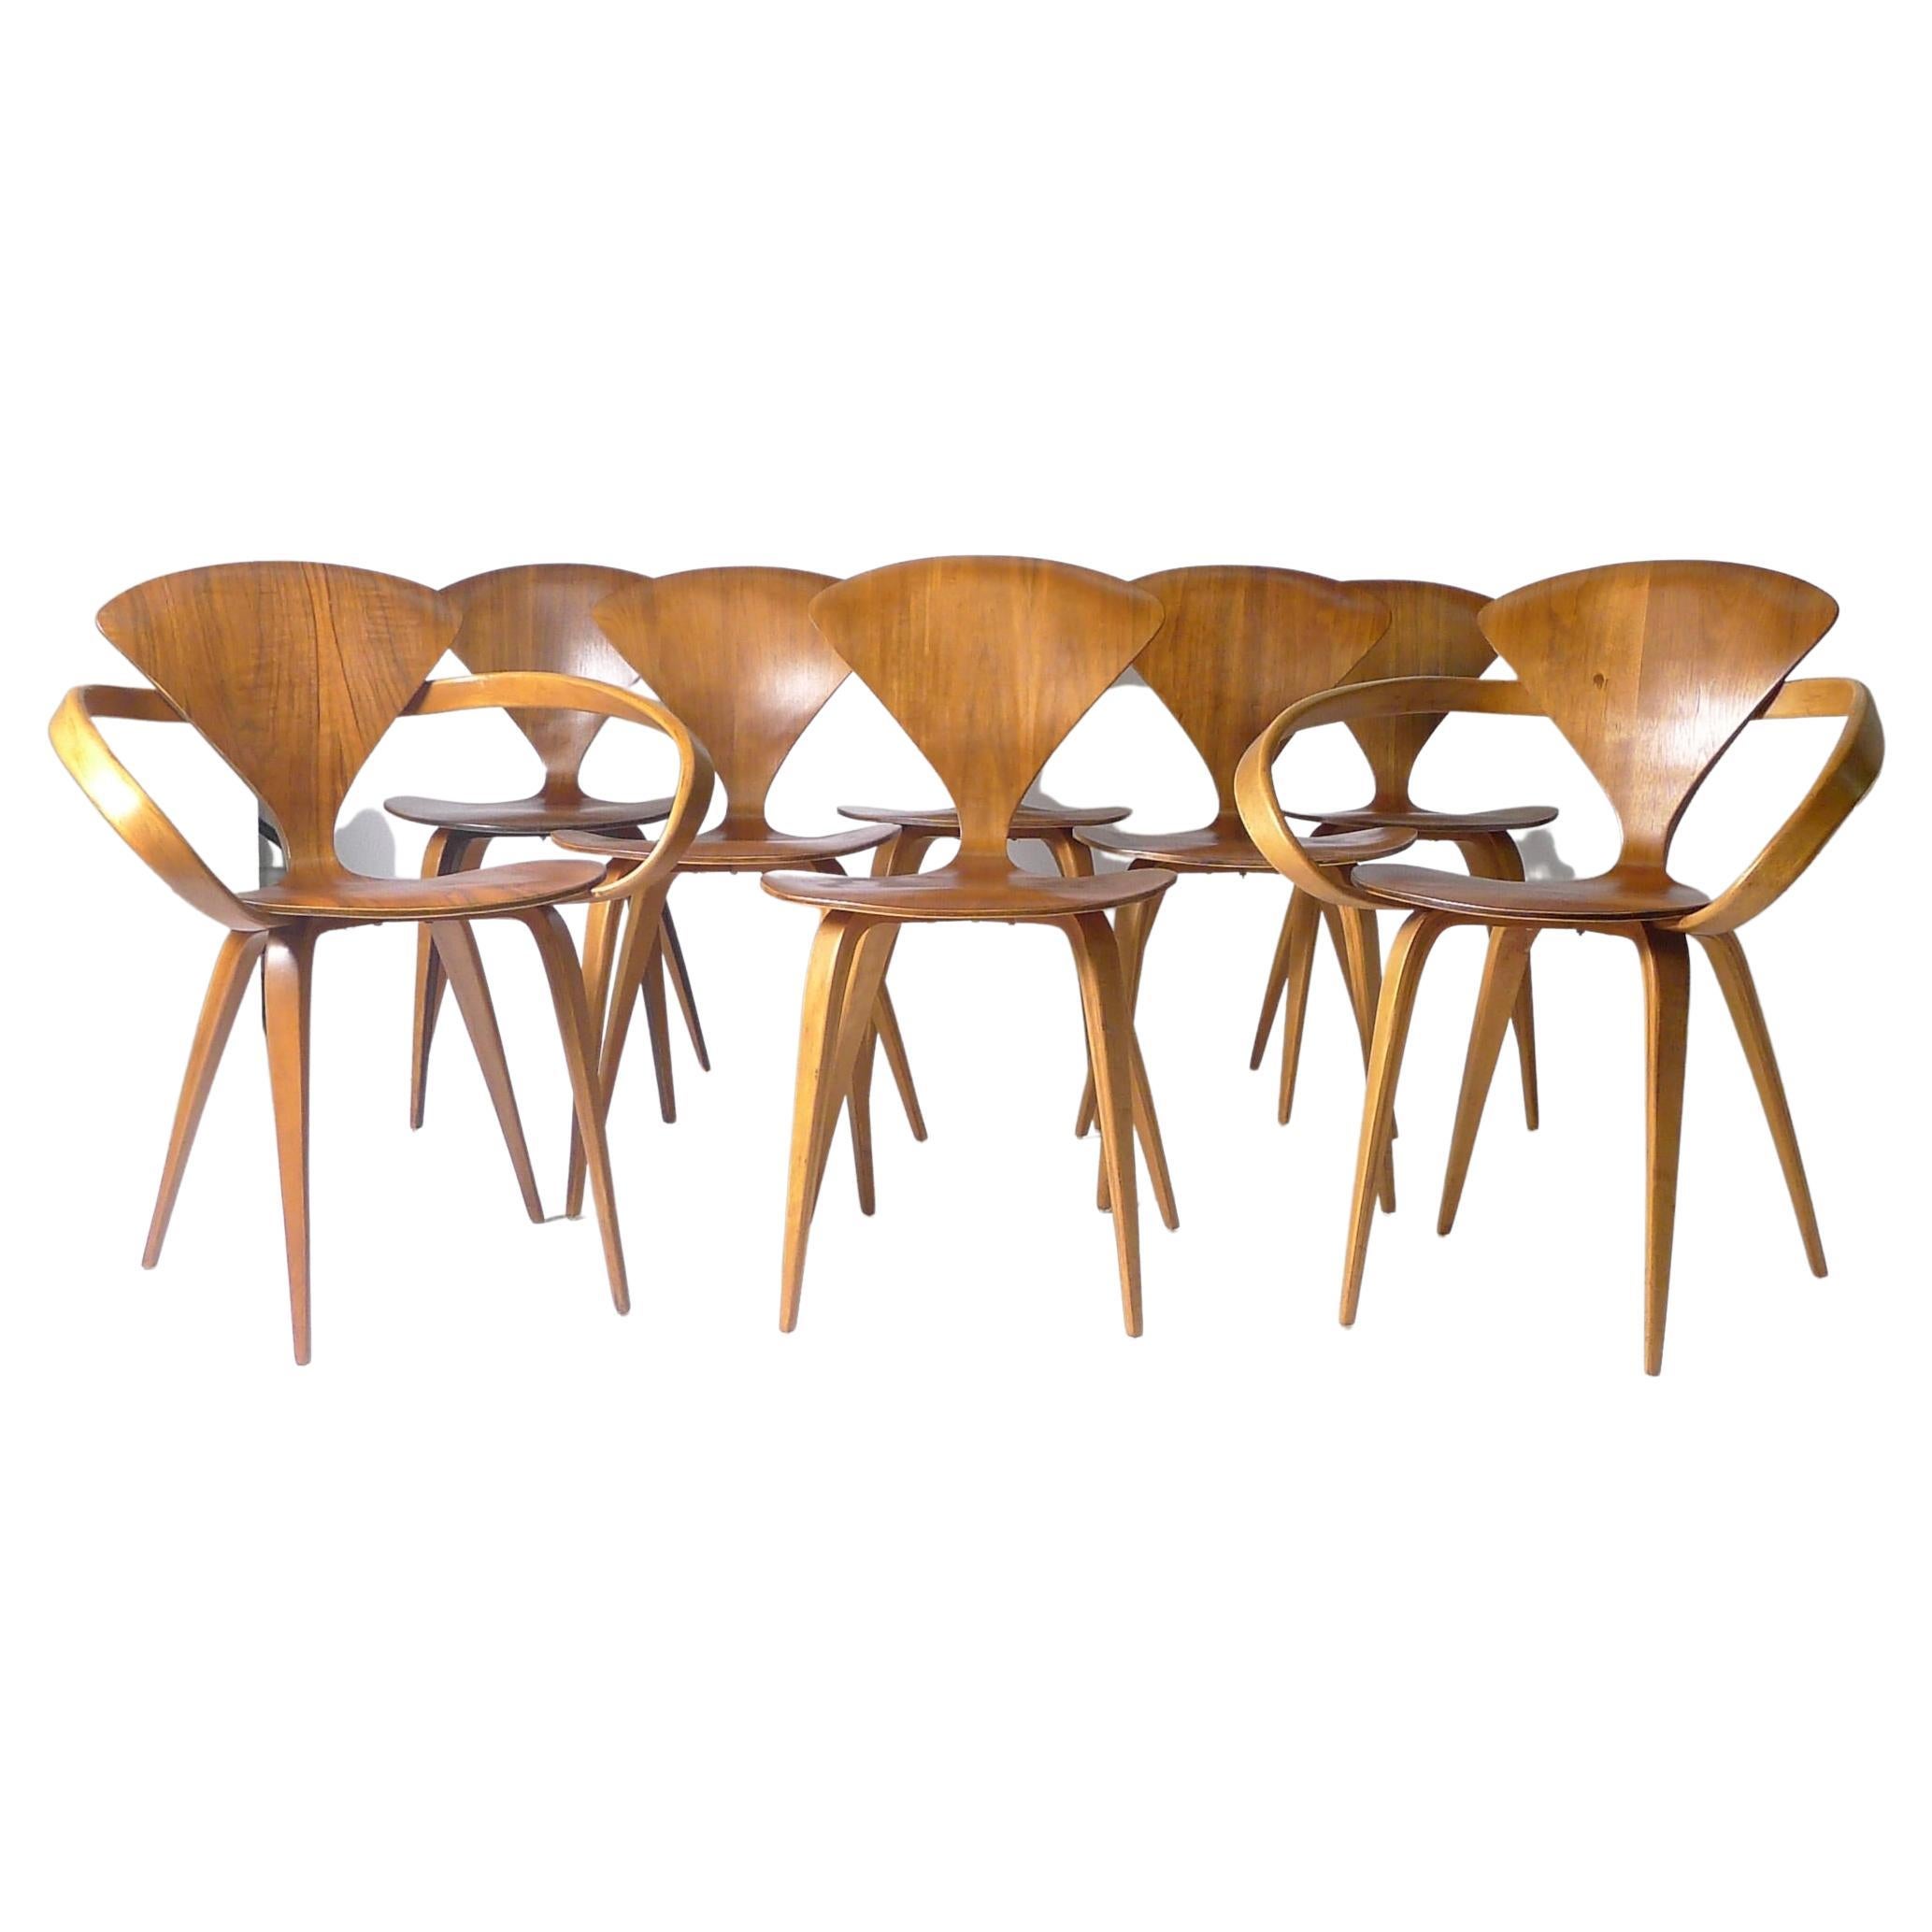 Norman Cherner for Plycraft, Set of 8 Original Chairs with Labels, Walnut Veneer